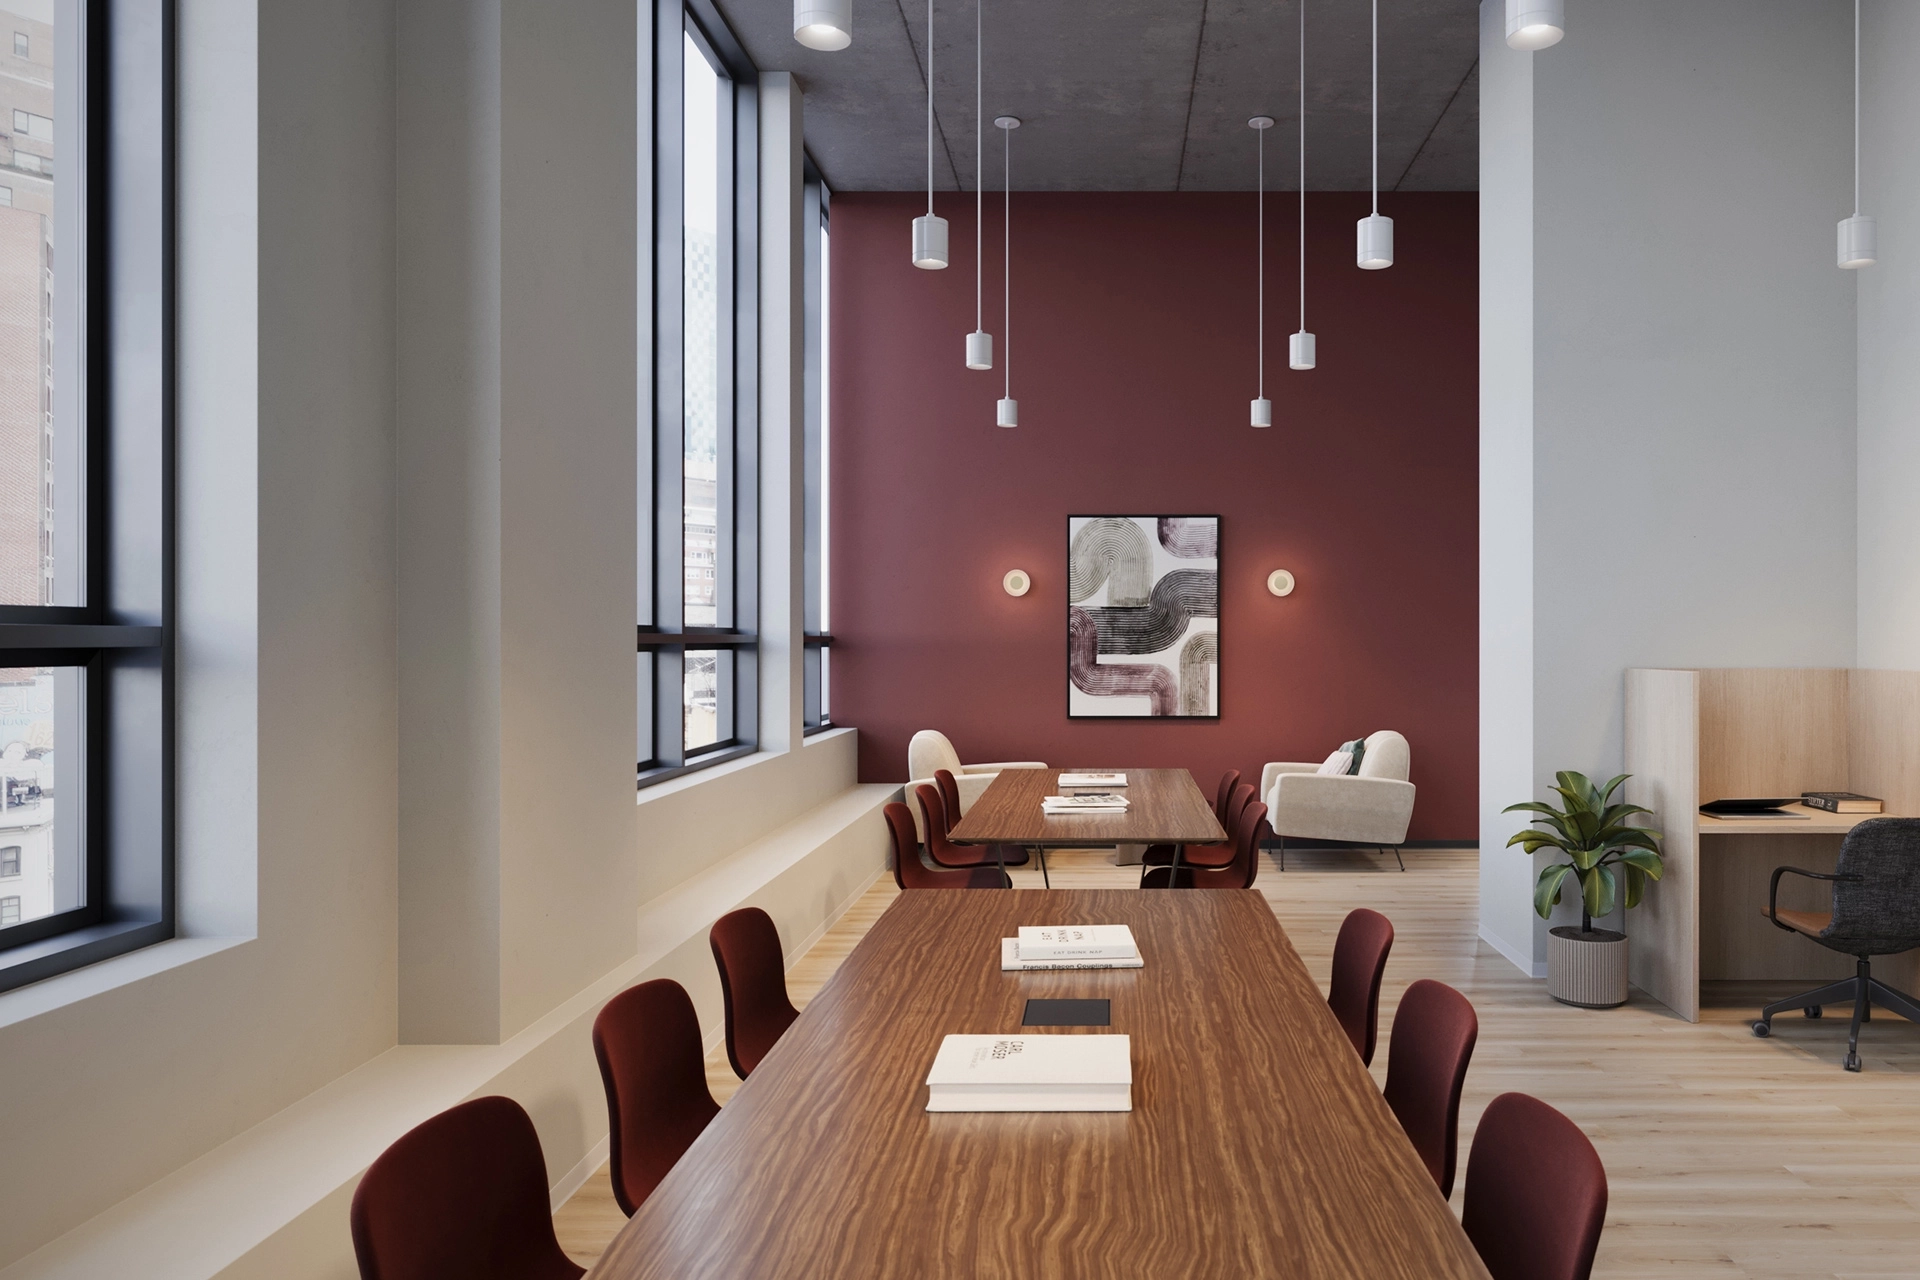 Modern coworking meeting room with a long wooden table, pendant lighting, and a burgundy accent wall with artwork.